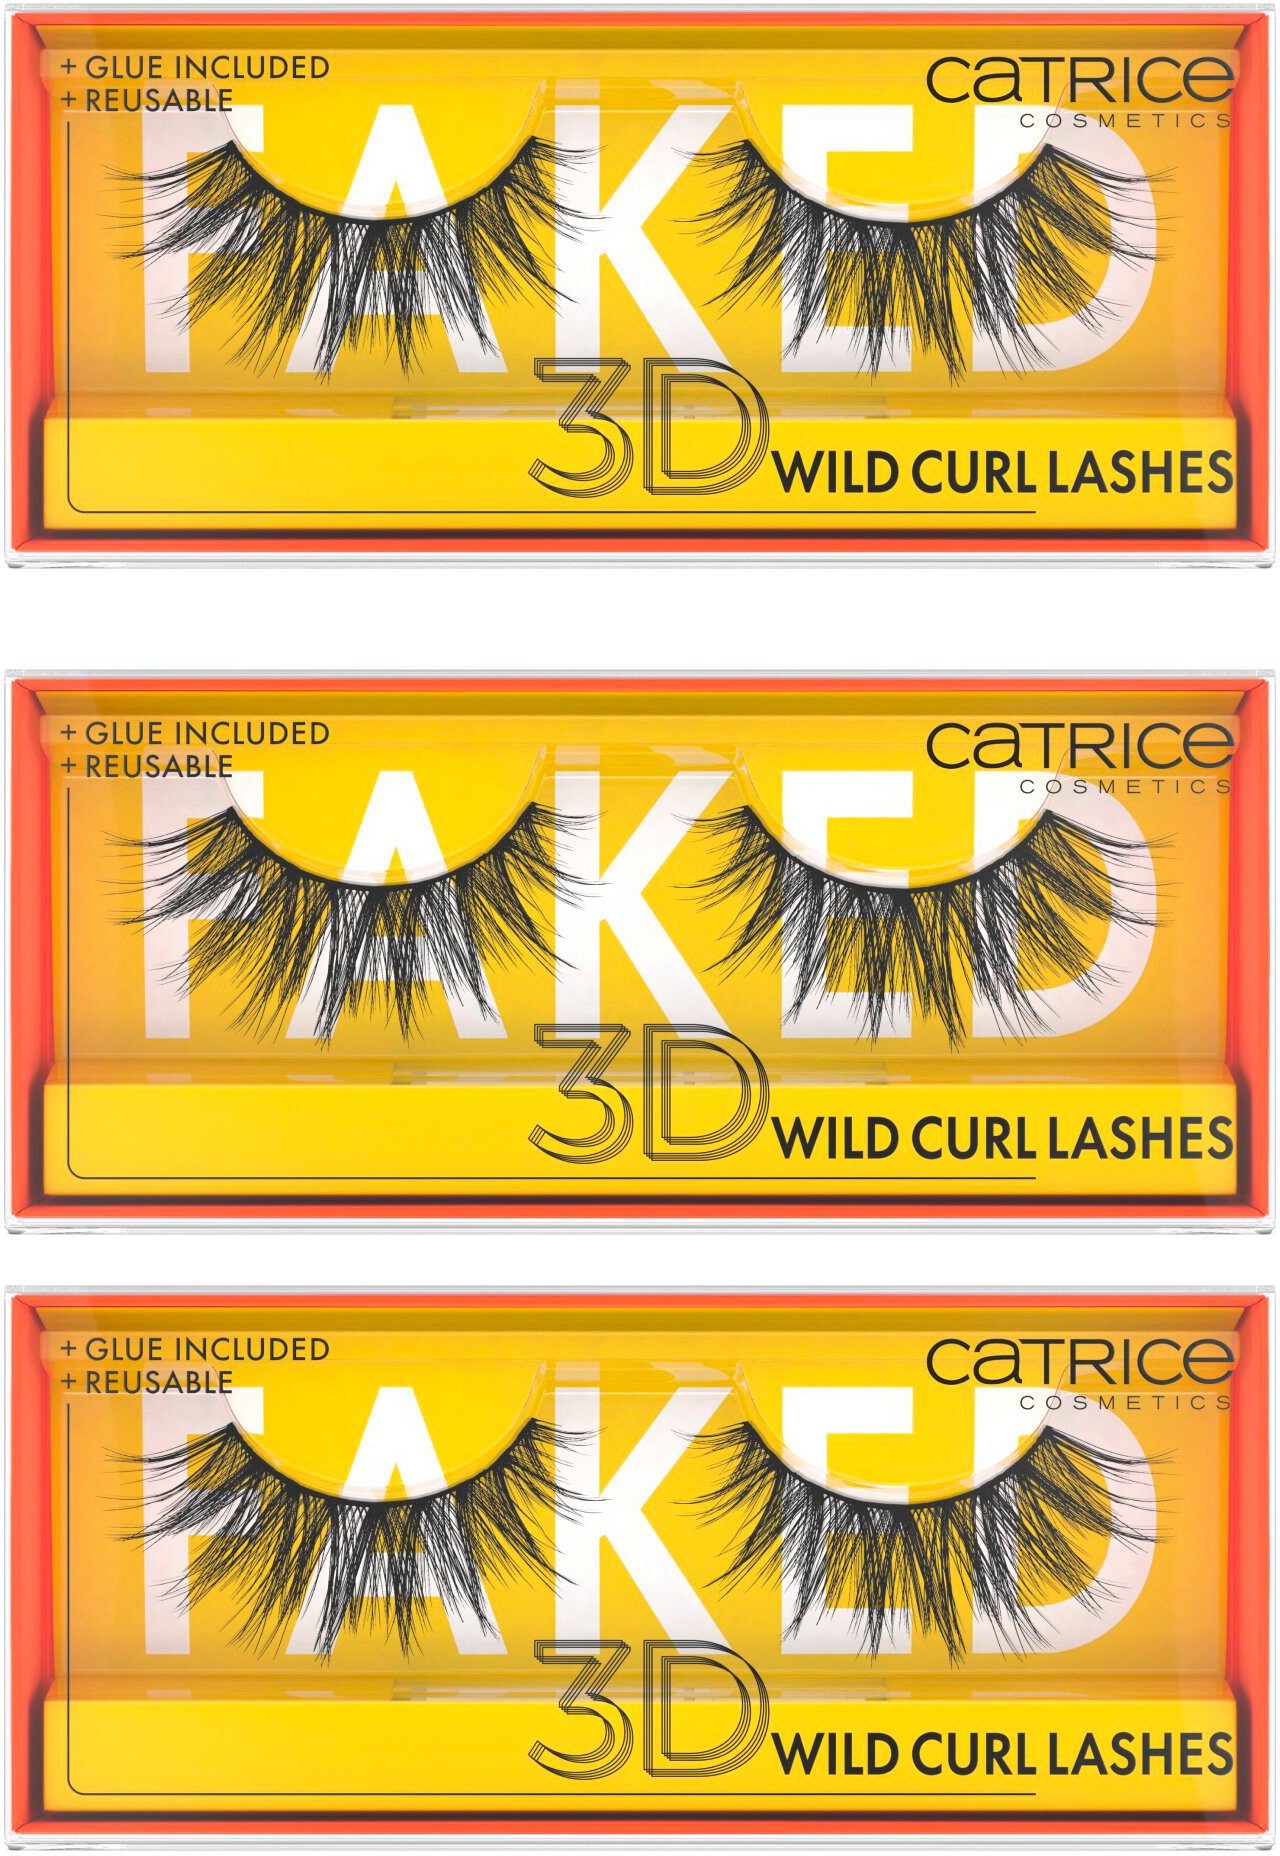 Catrice Bandwimpern Faked Wild Curl 3 Lashes, Set, 3D